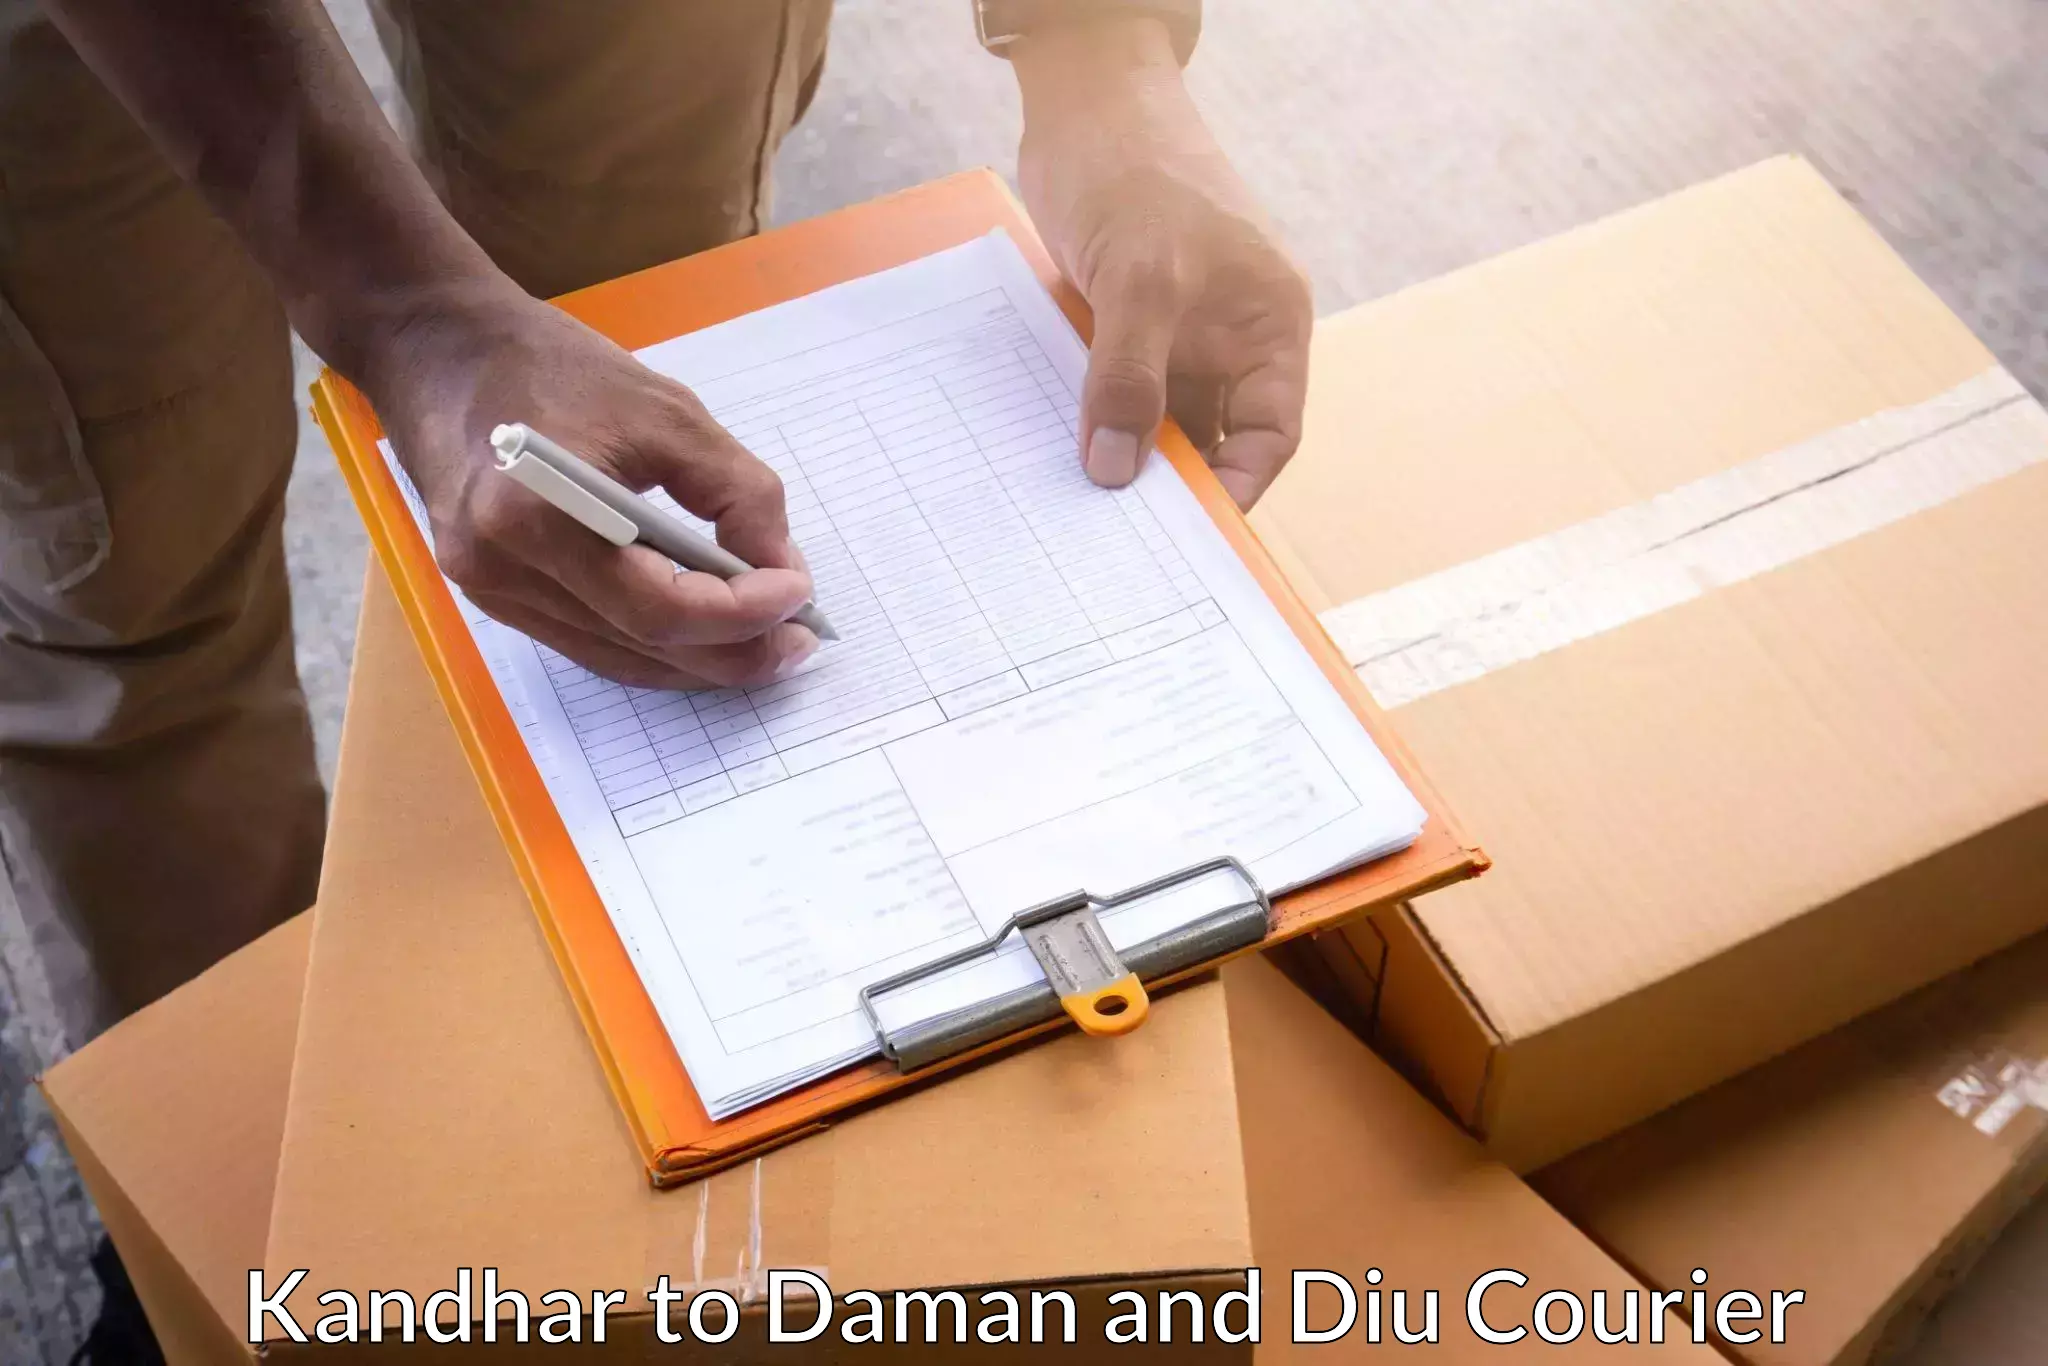 Courier service efficiency Kandhar to Daman